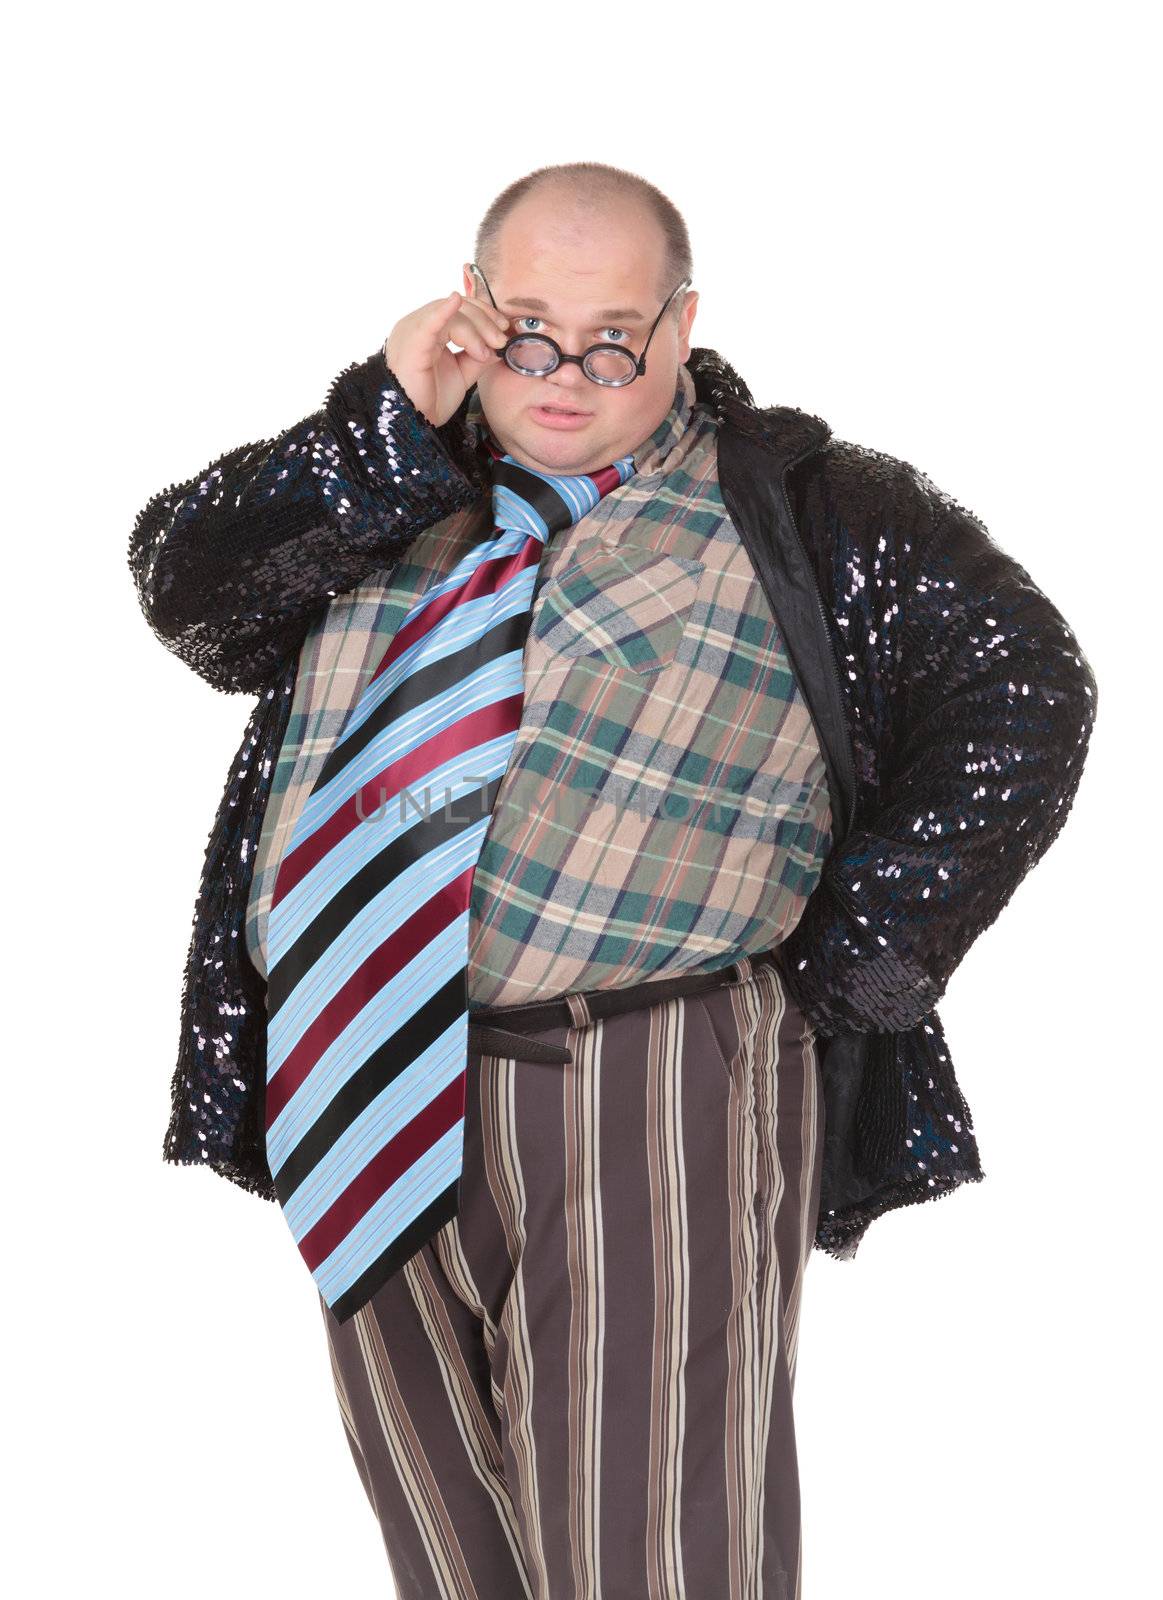 Fun portrait of an obese man with an outrageous fashion sense wearing a mixture of stripes, checks and spangles topped by an oversized flamboyant tie, on white